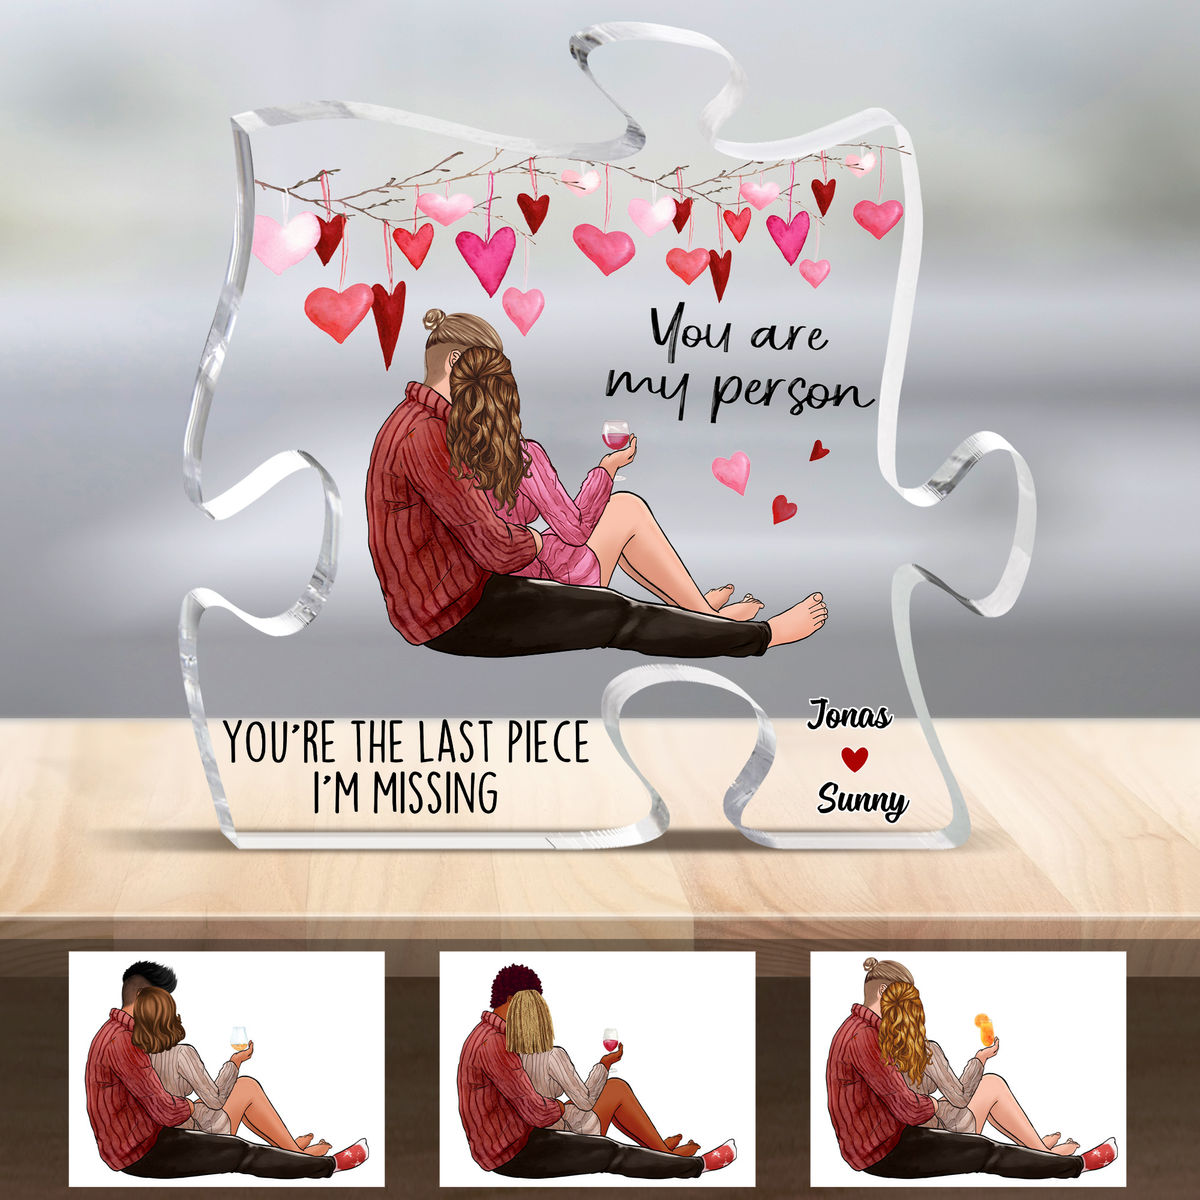 You are my person (22591) - Wedding Gifts , Anniversary Gifts, Valentine Gifts, Christmas Gifts